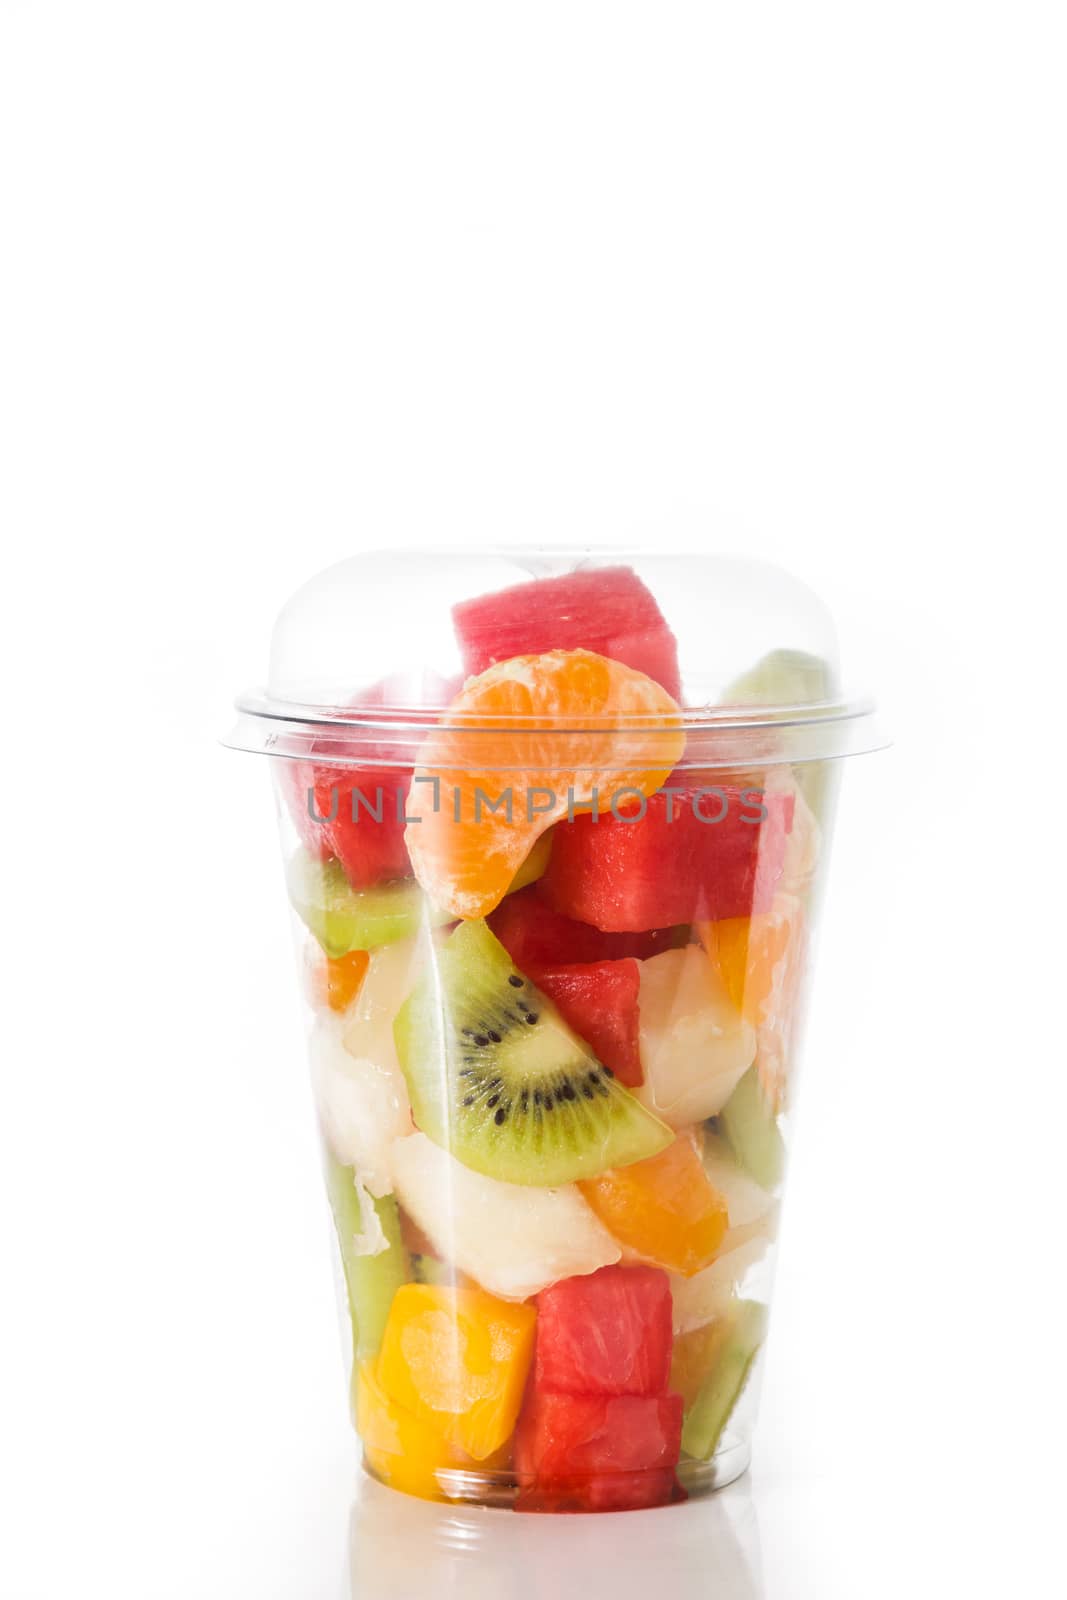 Fresh cut fruit in a plastic cup isolated on white background